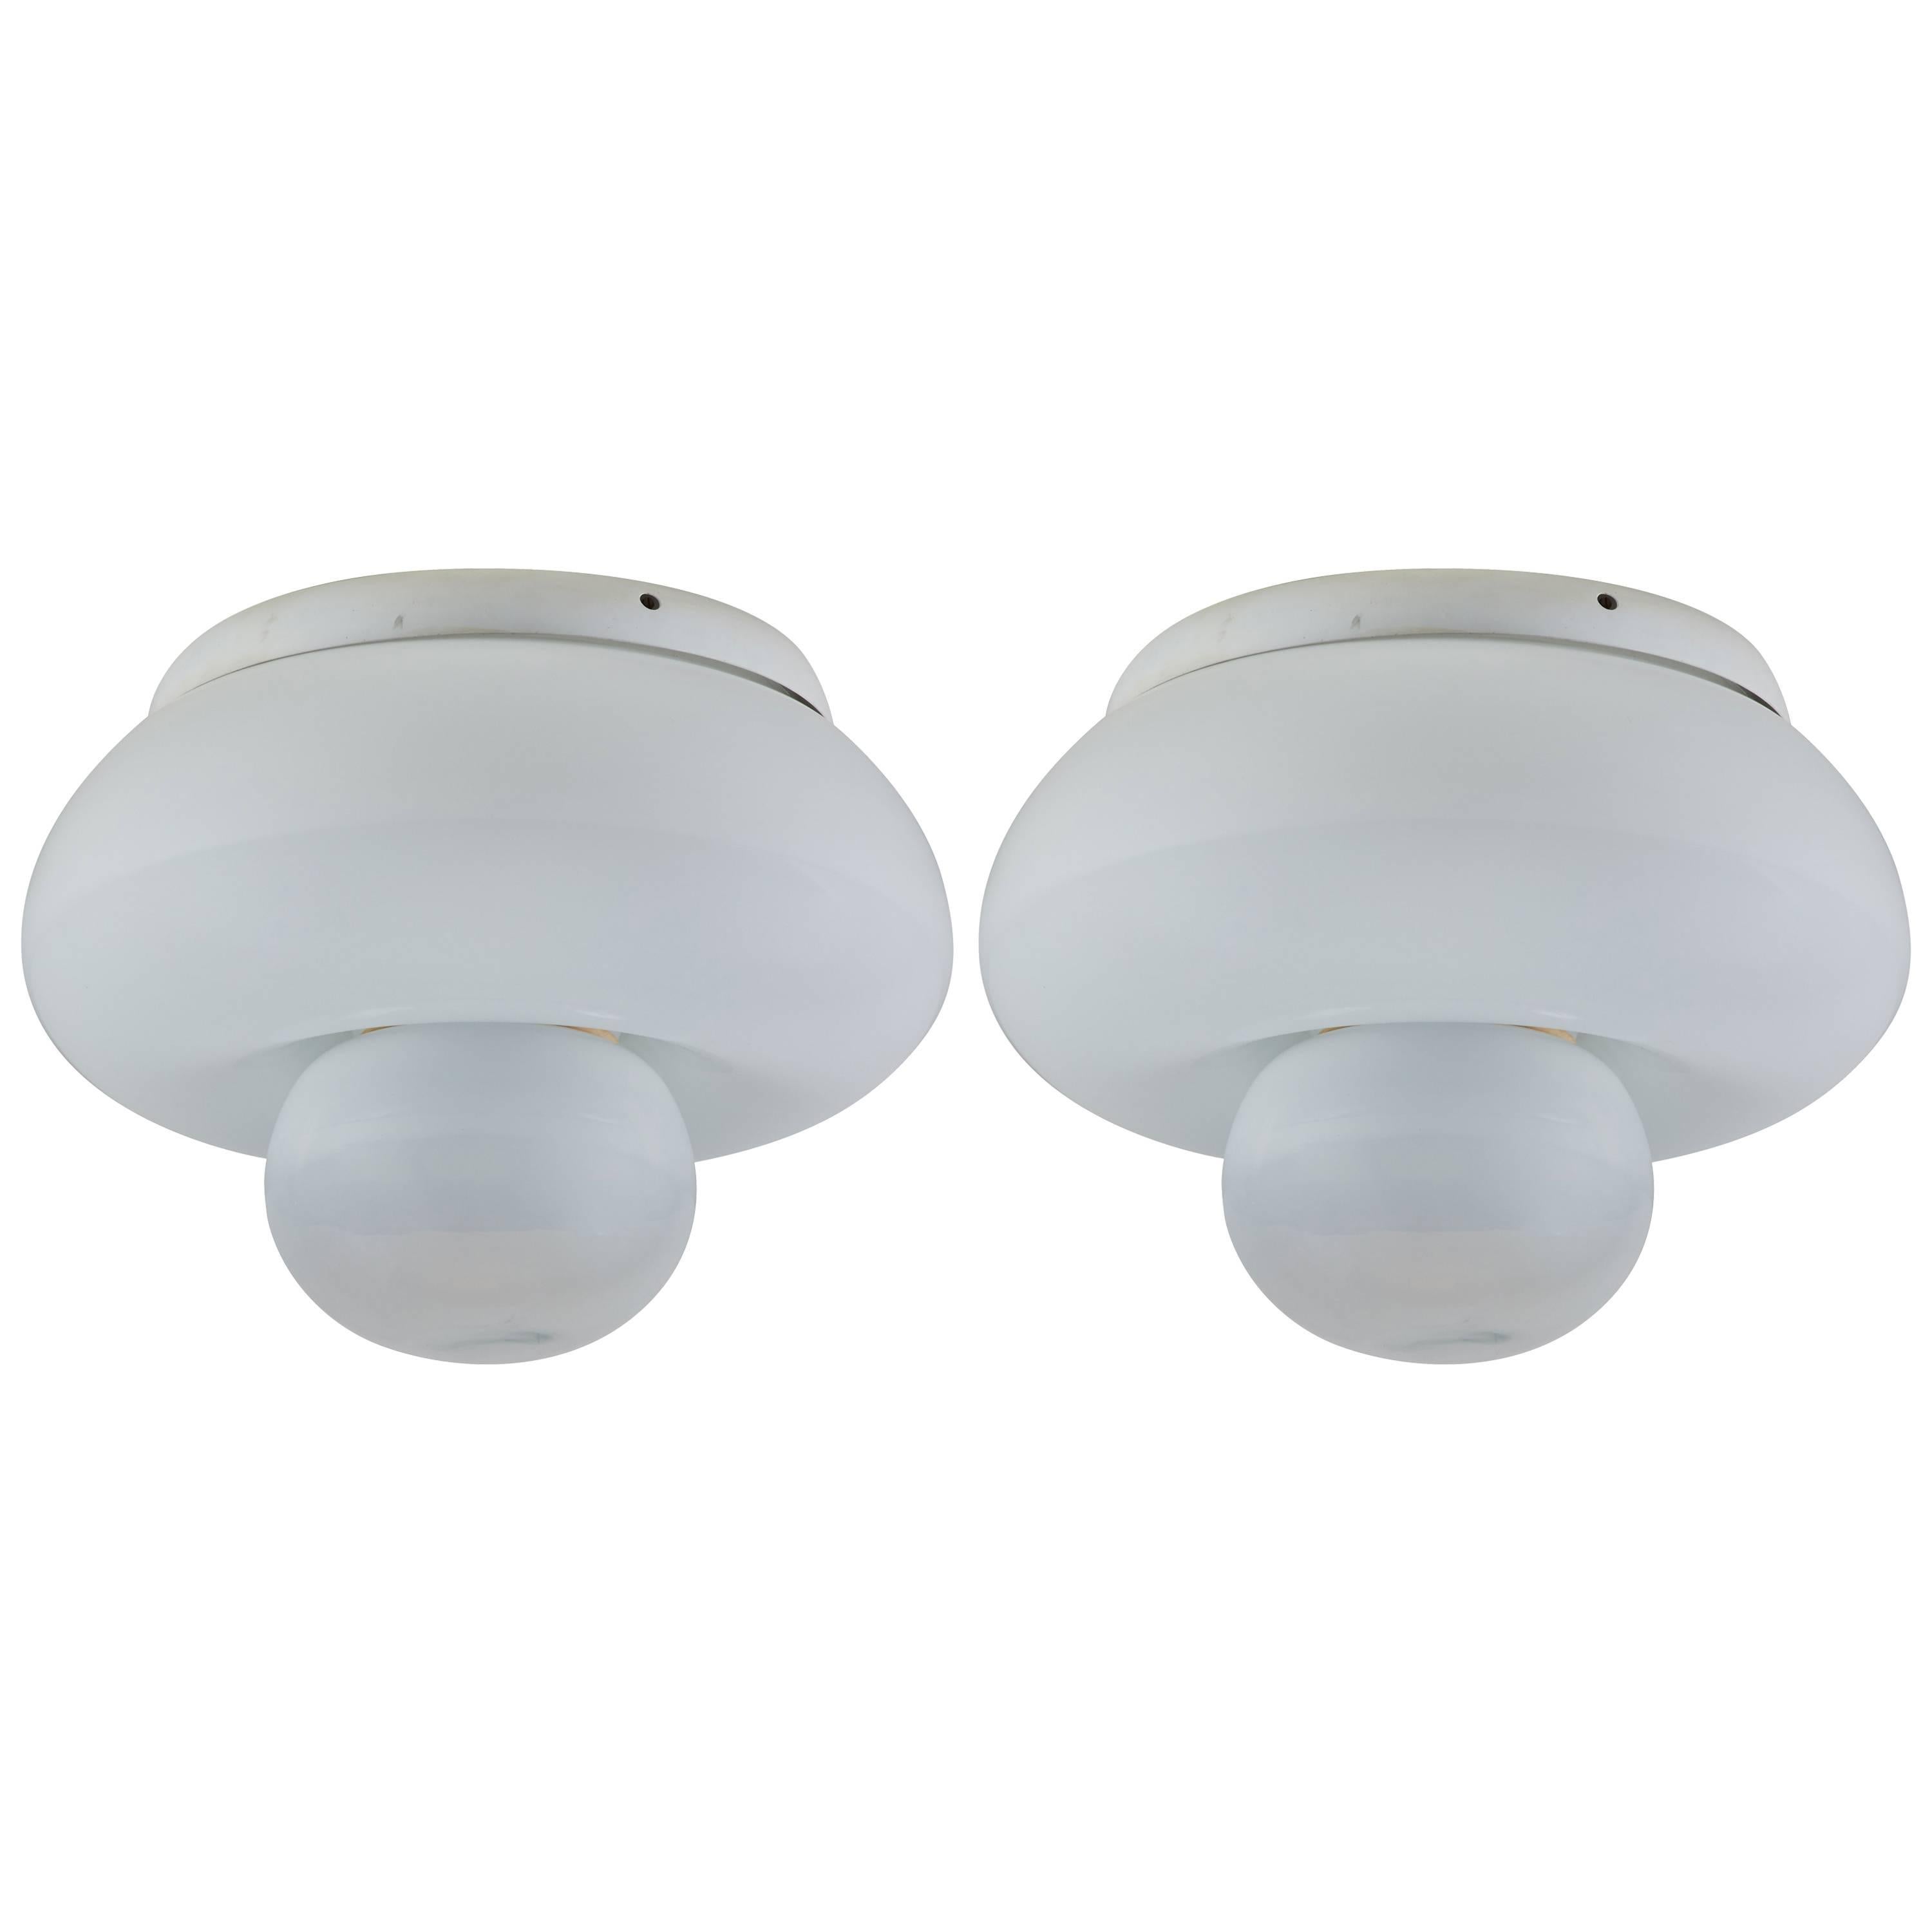 Two Unique "Electra" Flushmount Ceiling Lights by Giuliana Gramigna for Artemide